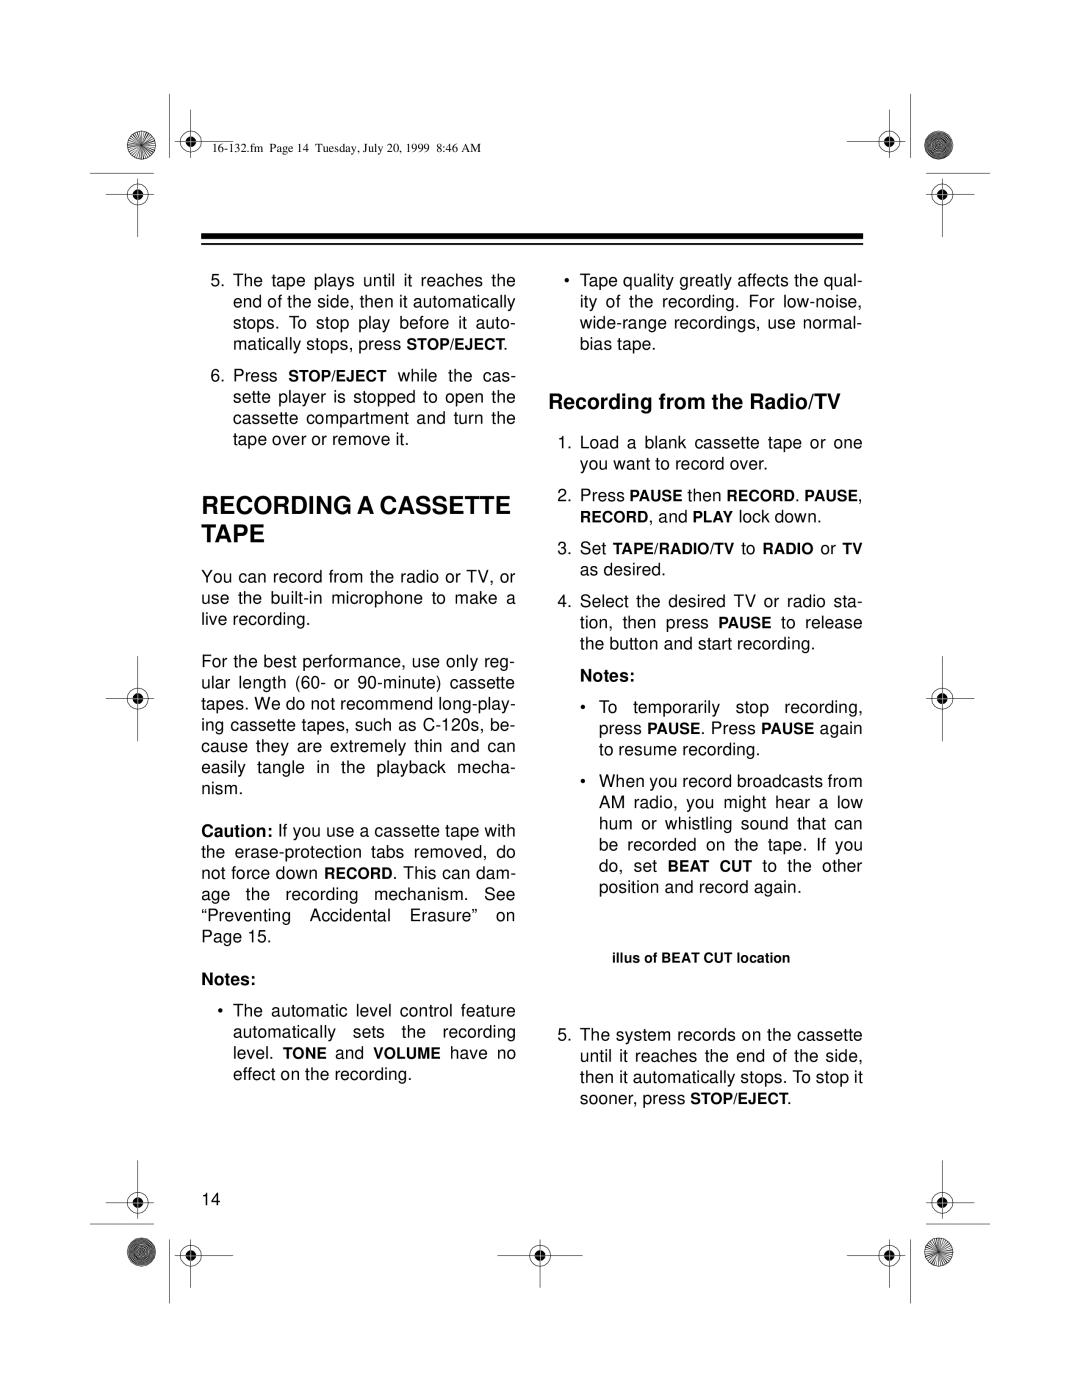 Optimus 16-132 owner manual Recording A Cassette Tape, Recording from the Radio/TV 